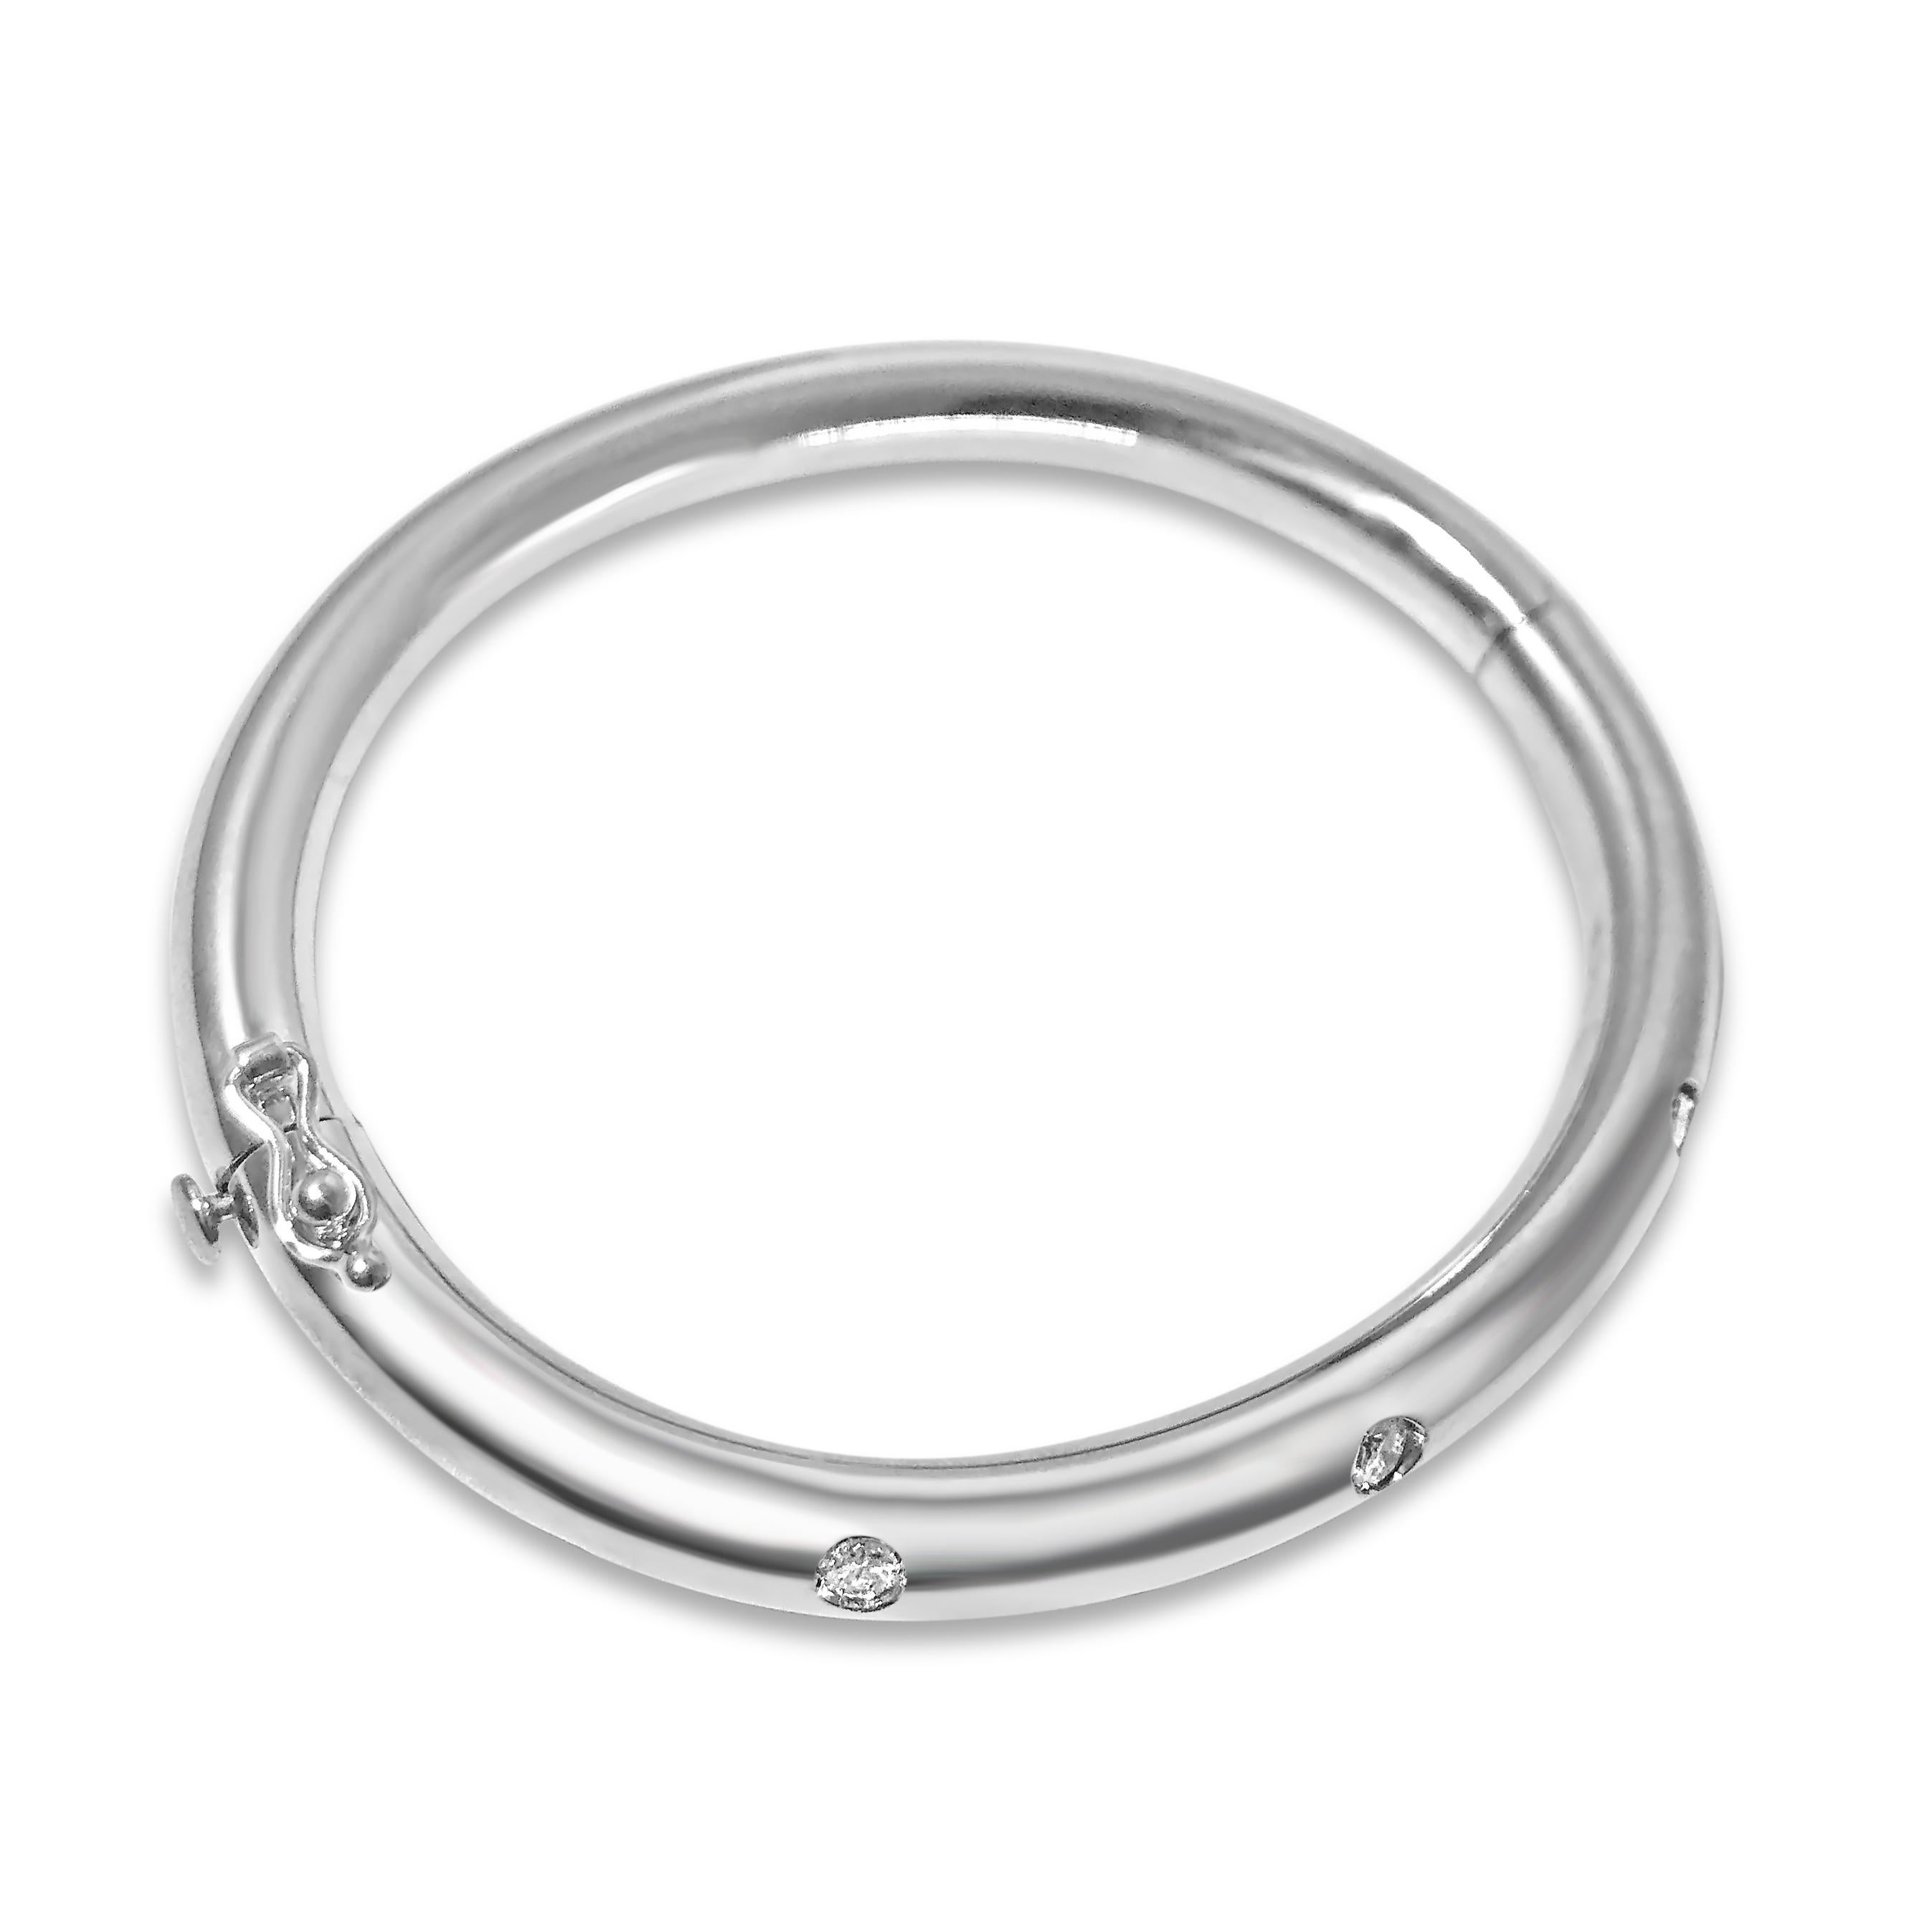 Our 14K white gold ¼ inch T-7 bangle is dotted with 7 round 2.9mm white diamonds, totaling 0.70ct. The oval bracelet features a snap & hinge closure.

Specifications:
- Stone(s): 2.9mm Diamonds
- Diamond-Cut & Clarity: 0.70ct. Round
- Dimention: 6